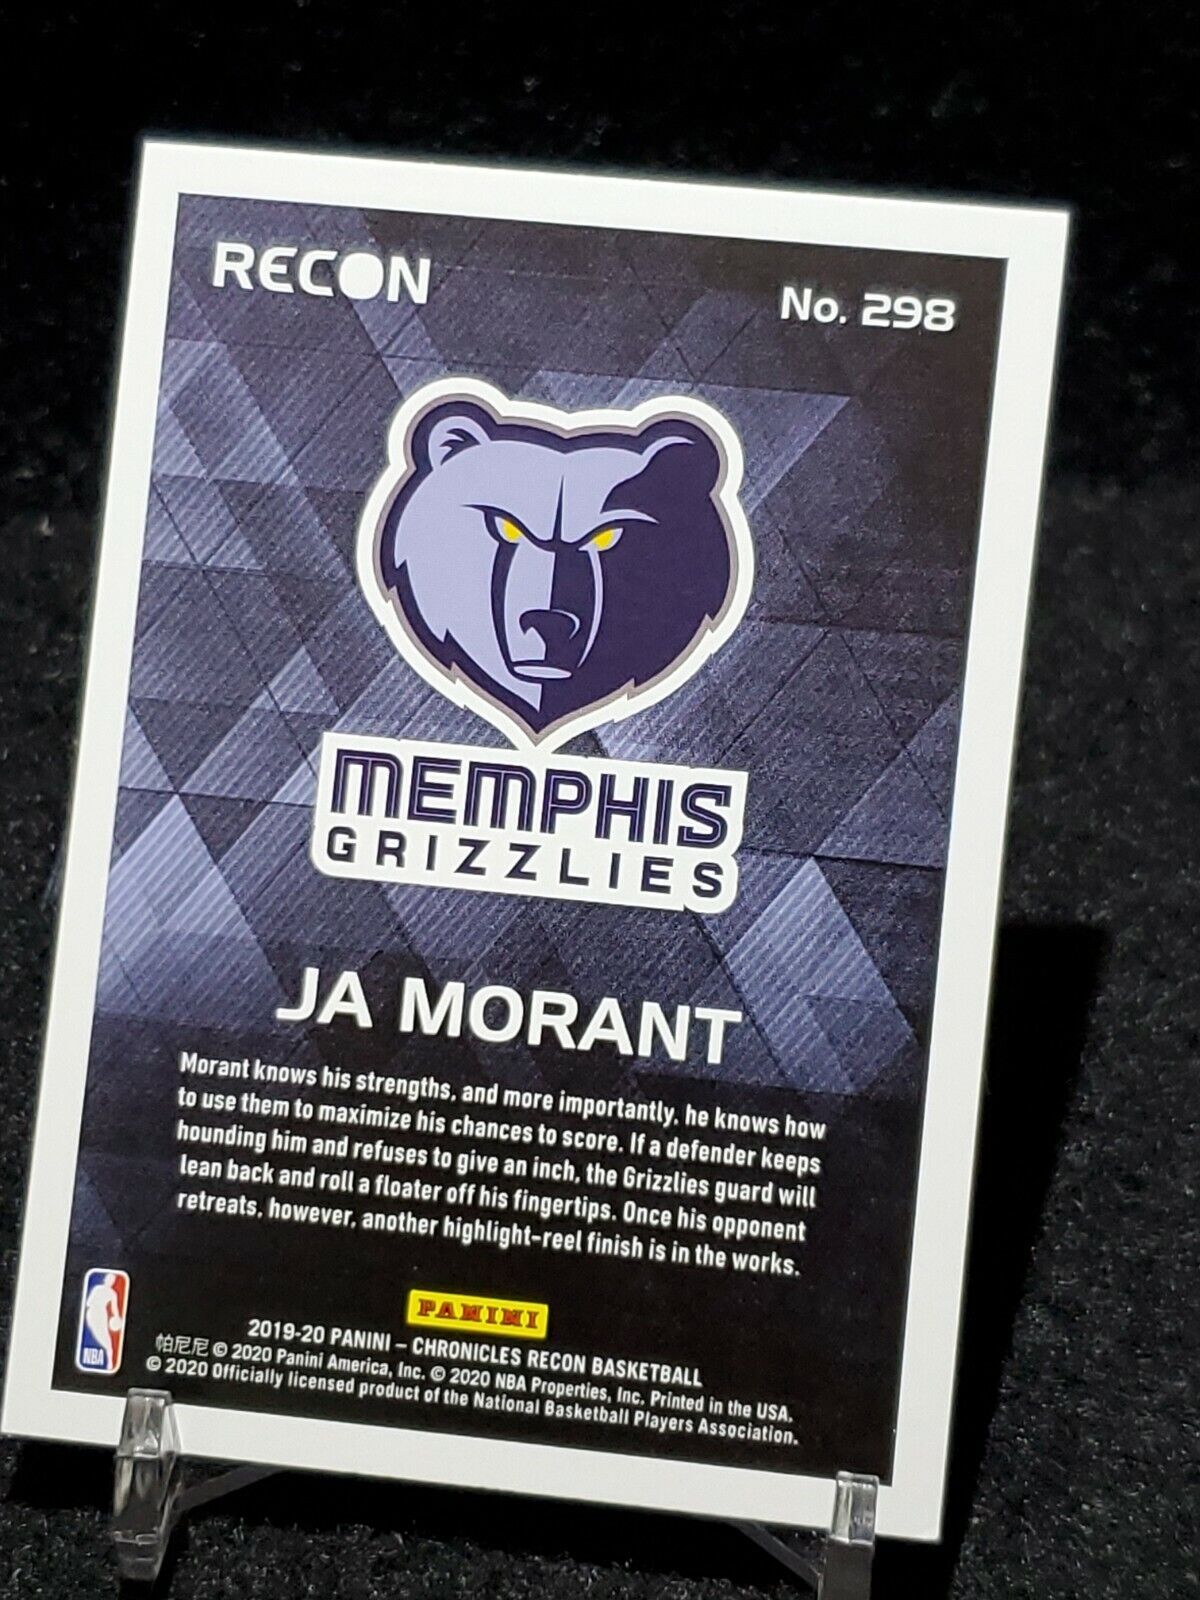 2019-20 Panini Chronicles Recon Ja Morant Pink Parallel Rookie RC Grizzlies  #298